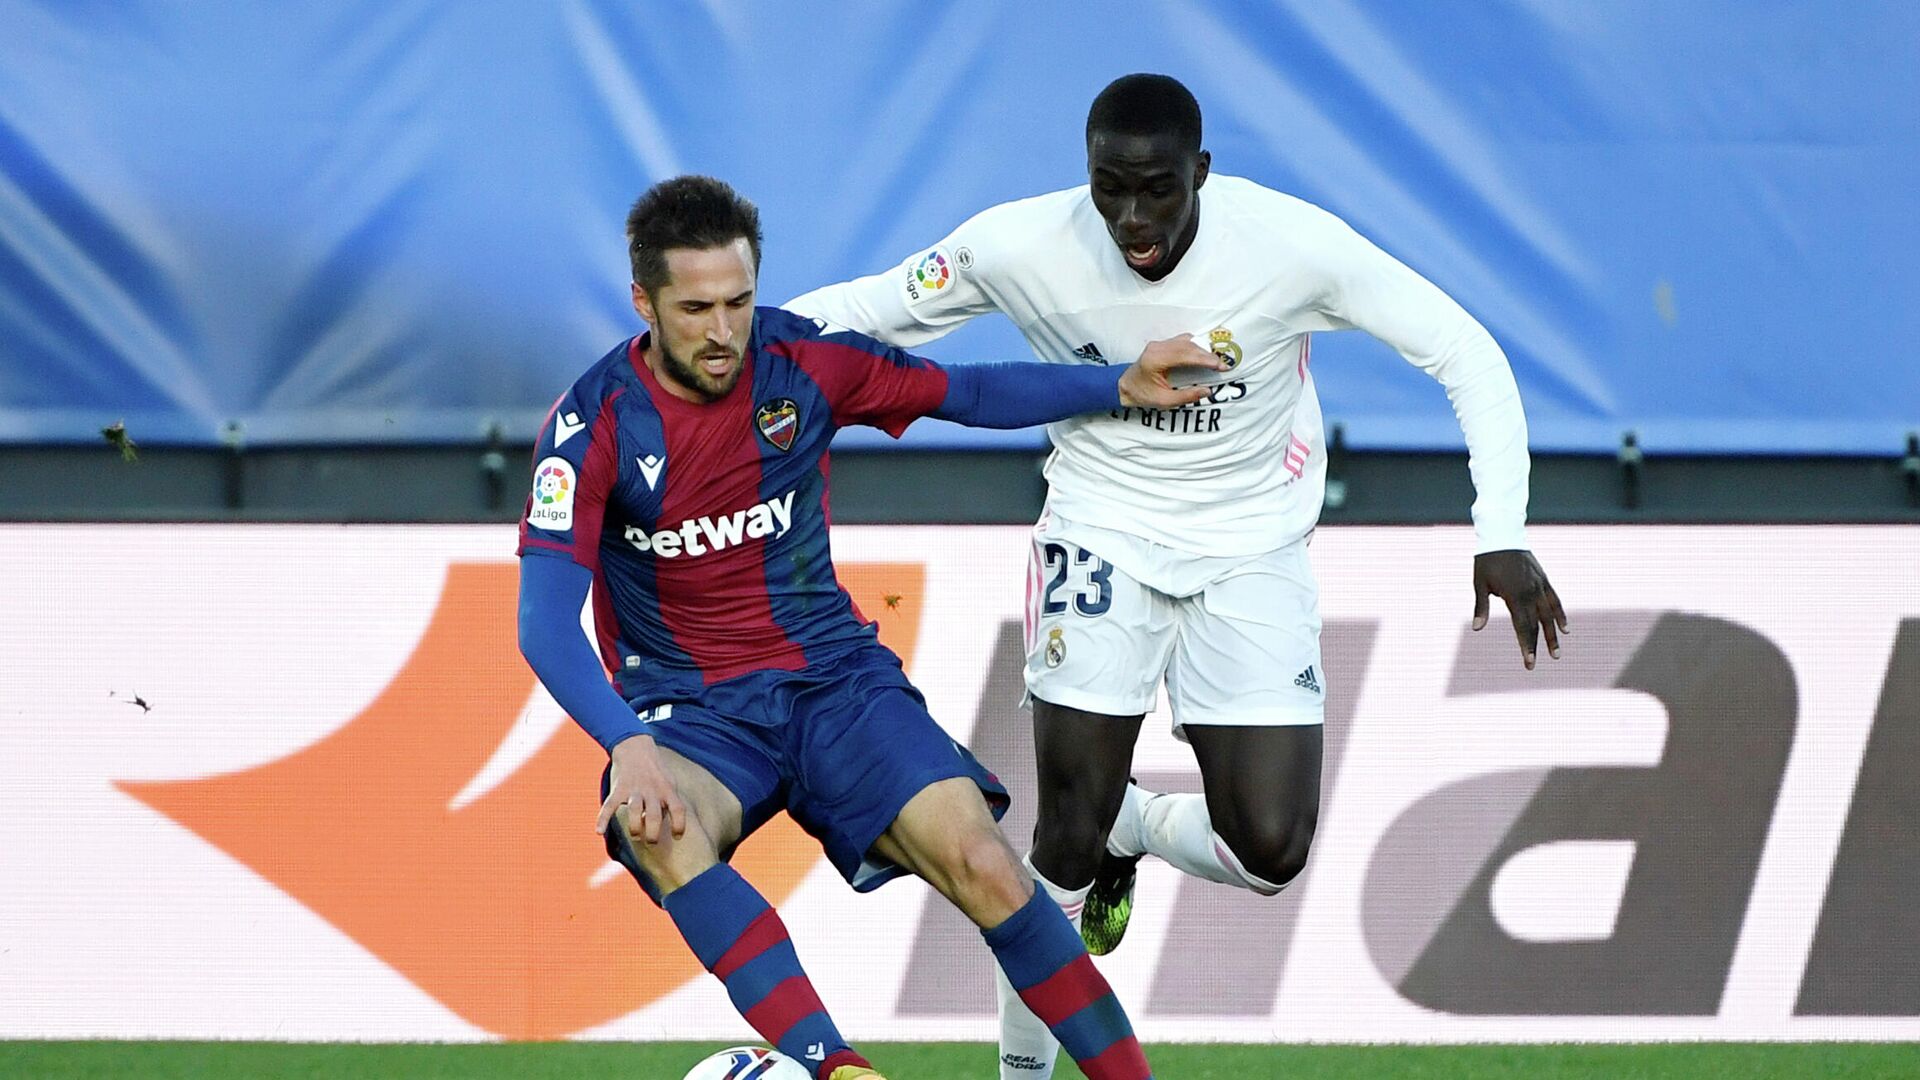 Levante's Spanish midfielder Jorge Miramon (L) vies with Real Madrid's French defender Ferland Mendy during the Spanish league football match Real Madrid CF against Levante UD at the Alfredo di Stefano stadium in Valdebebas, on the outskirts of Madrid on January 30, 2021. (Photo by PIERRE-PHILIPPE MARCOU / AFP) - РИА Новости, 1920, 30.01.2021